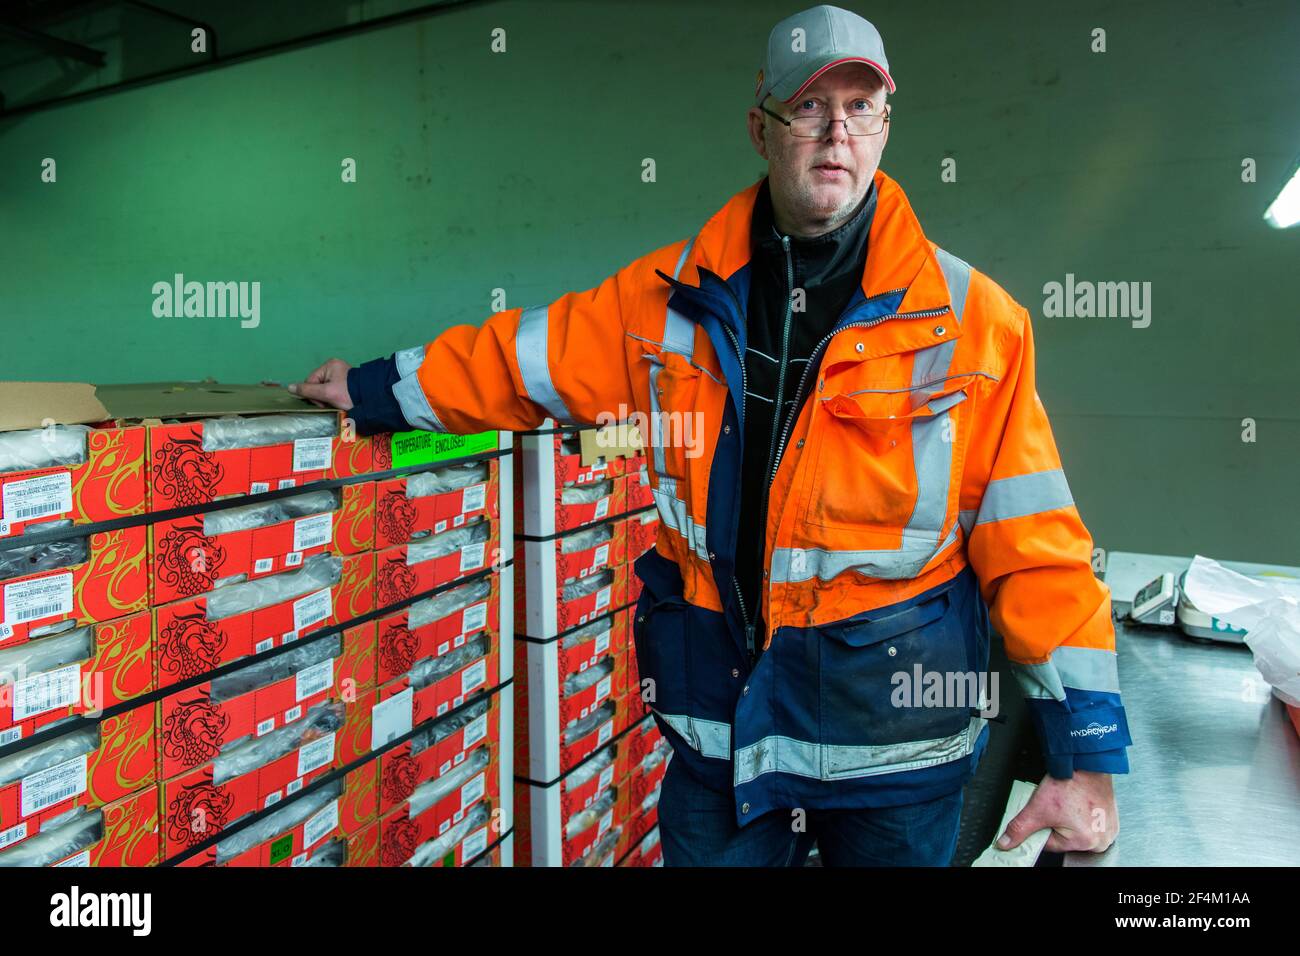 Rotterdam, Netherlands. One man checking a just arrived shipload of grapes, inside a cooled harbor warehouse. Stock Photo